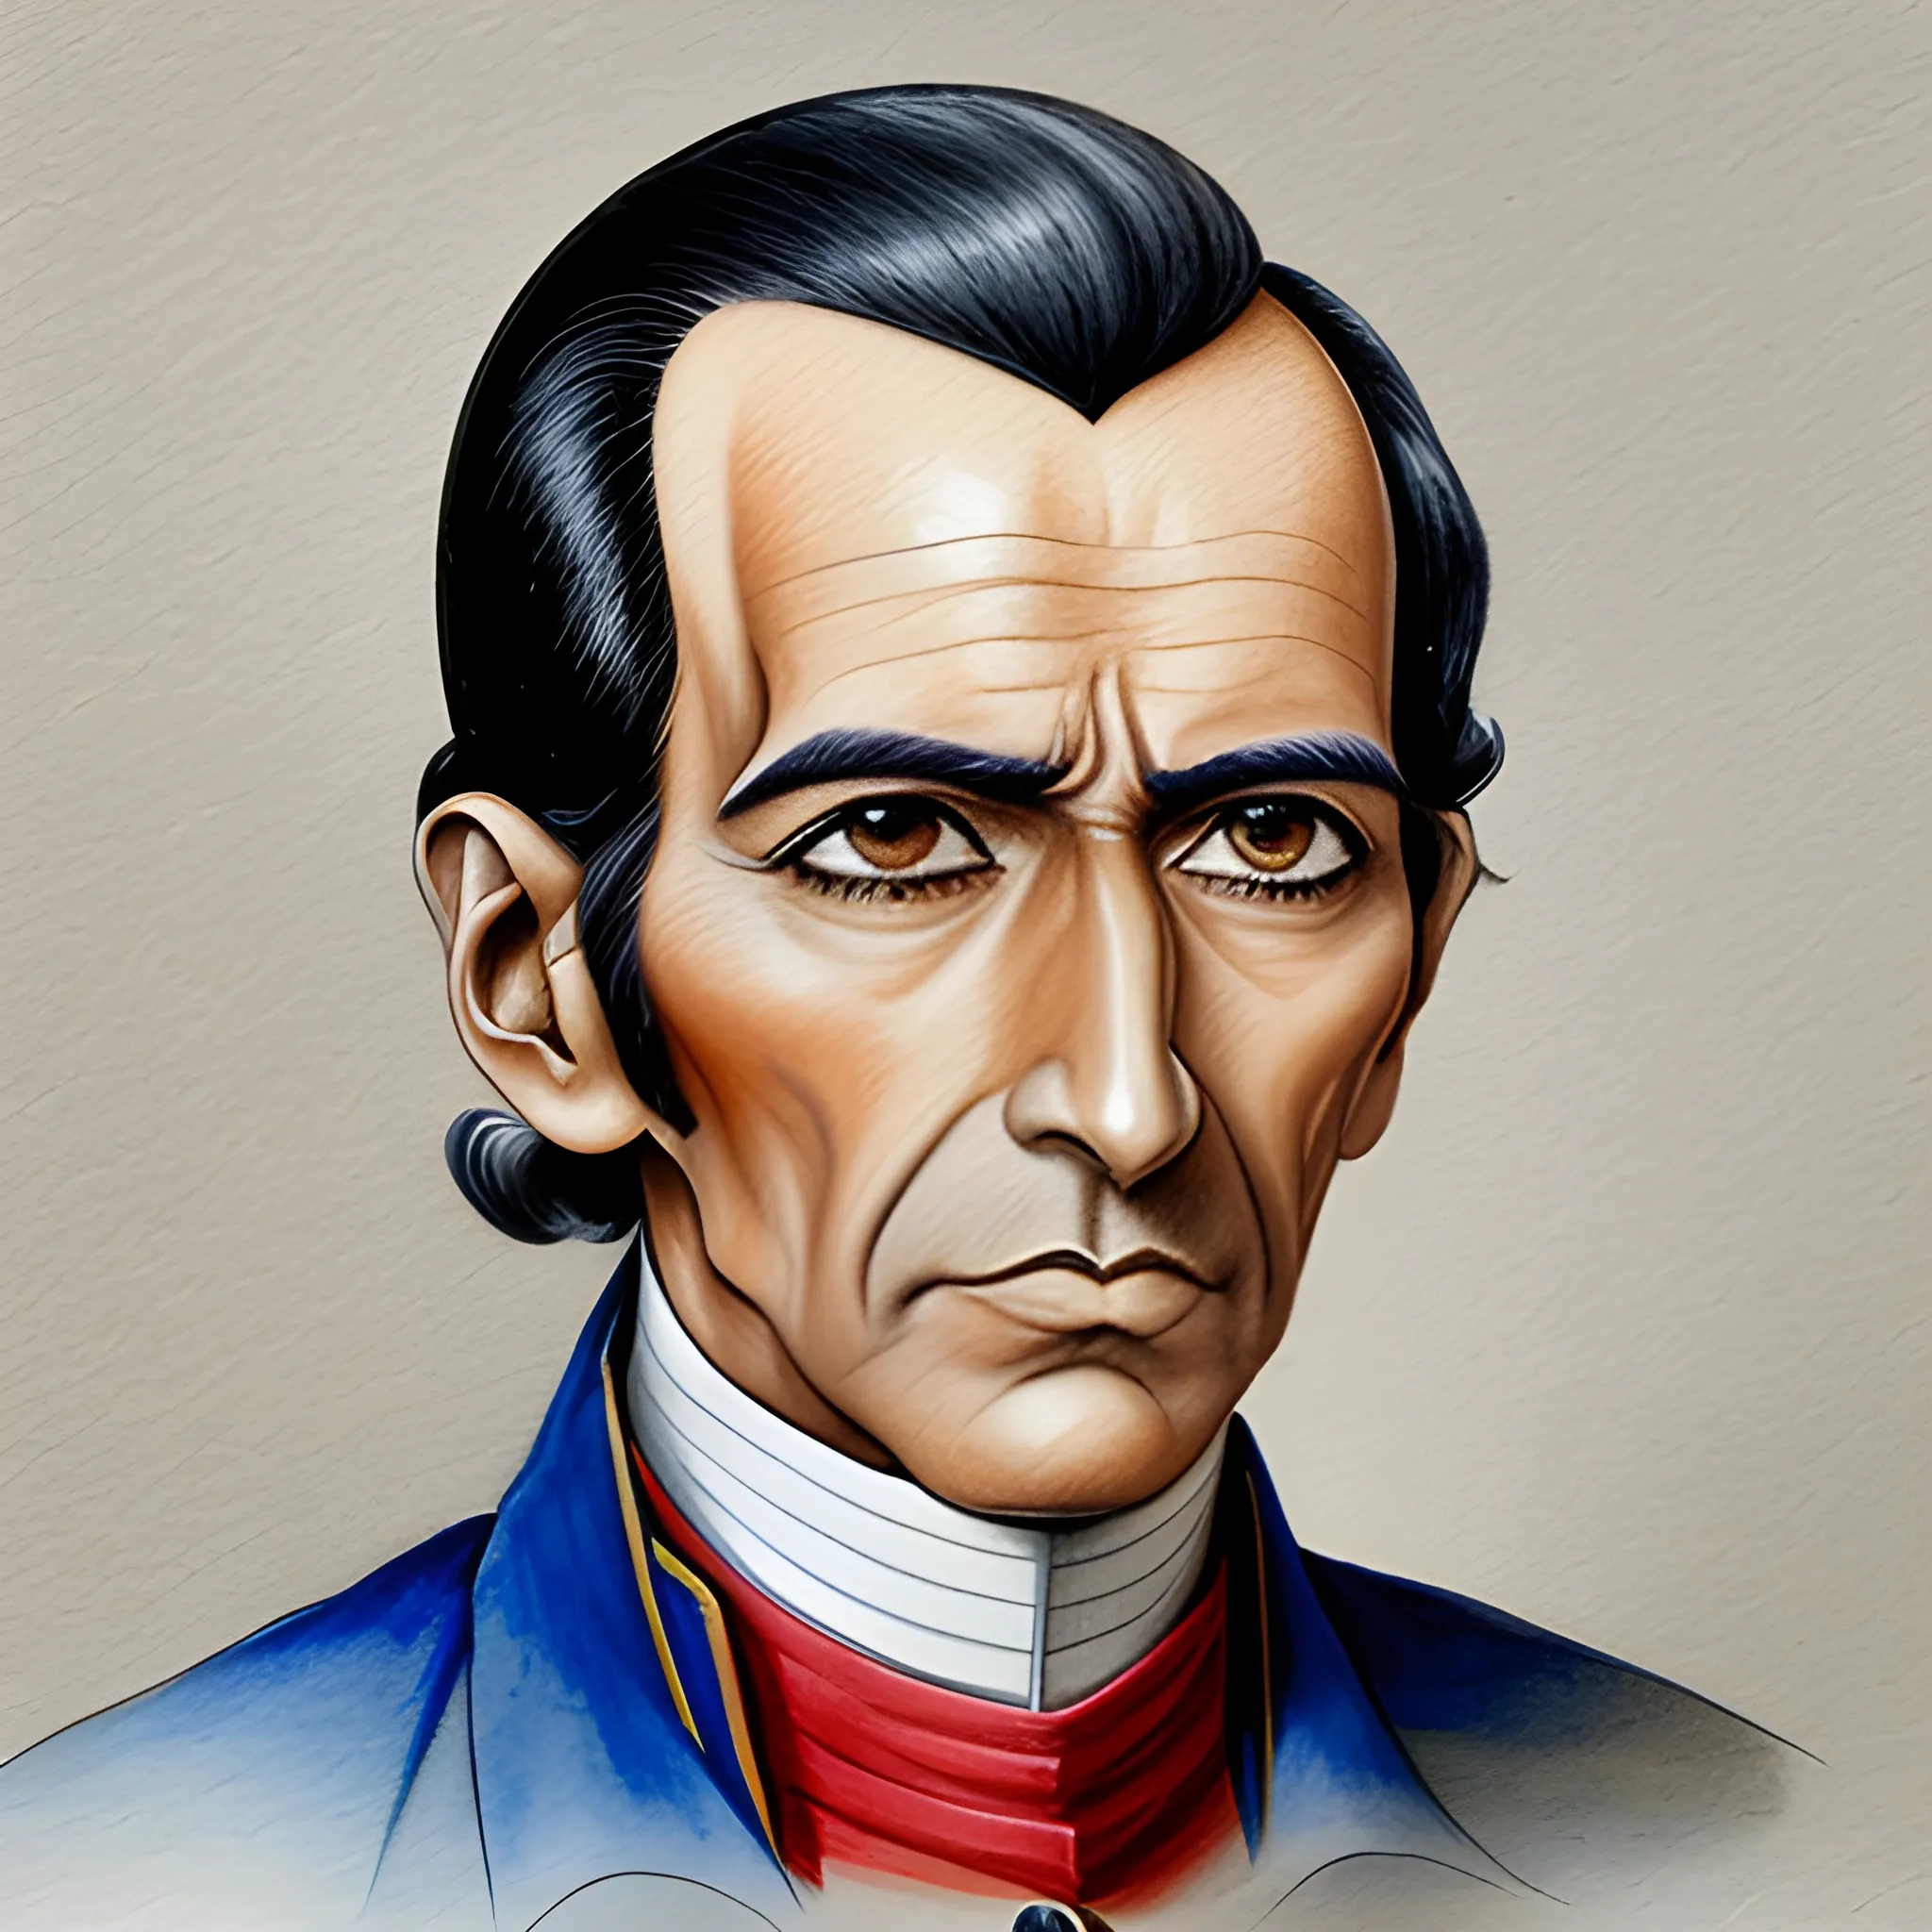 , 3D realistic Simon Bolivar´s 8th birthday. without military uniform
, Pencil Sketch, Water Color, Cartoon